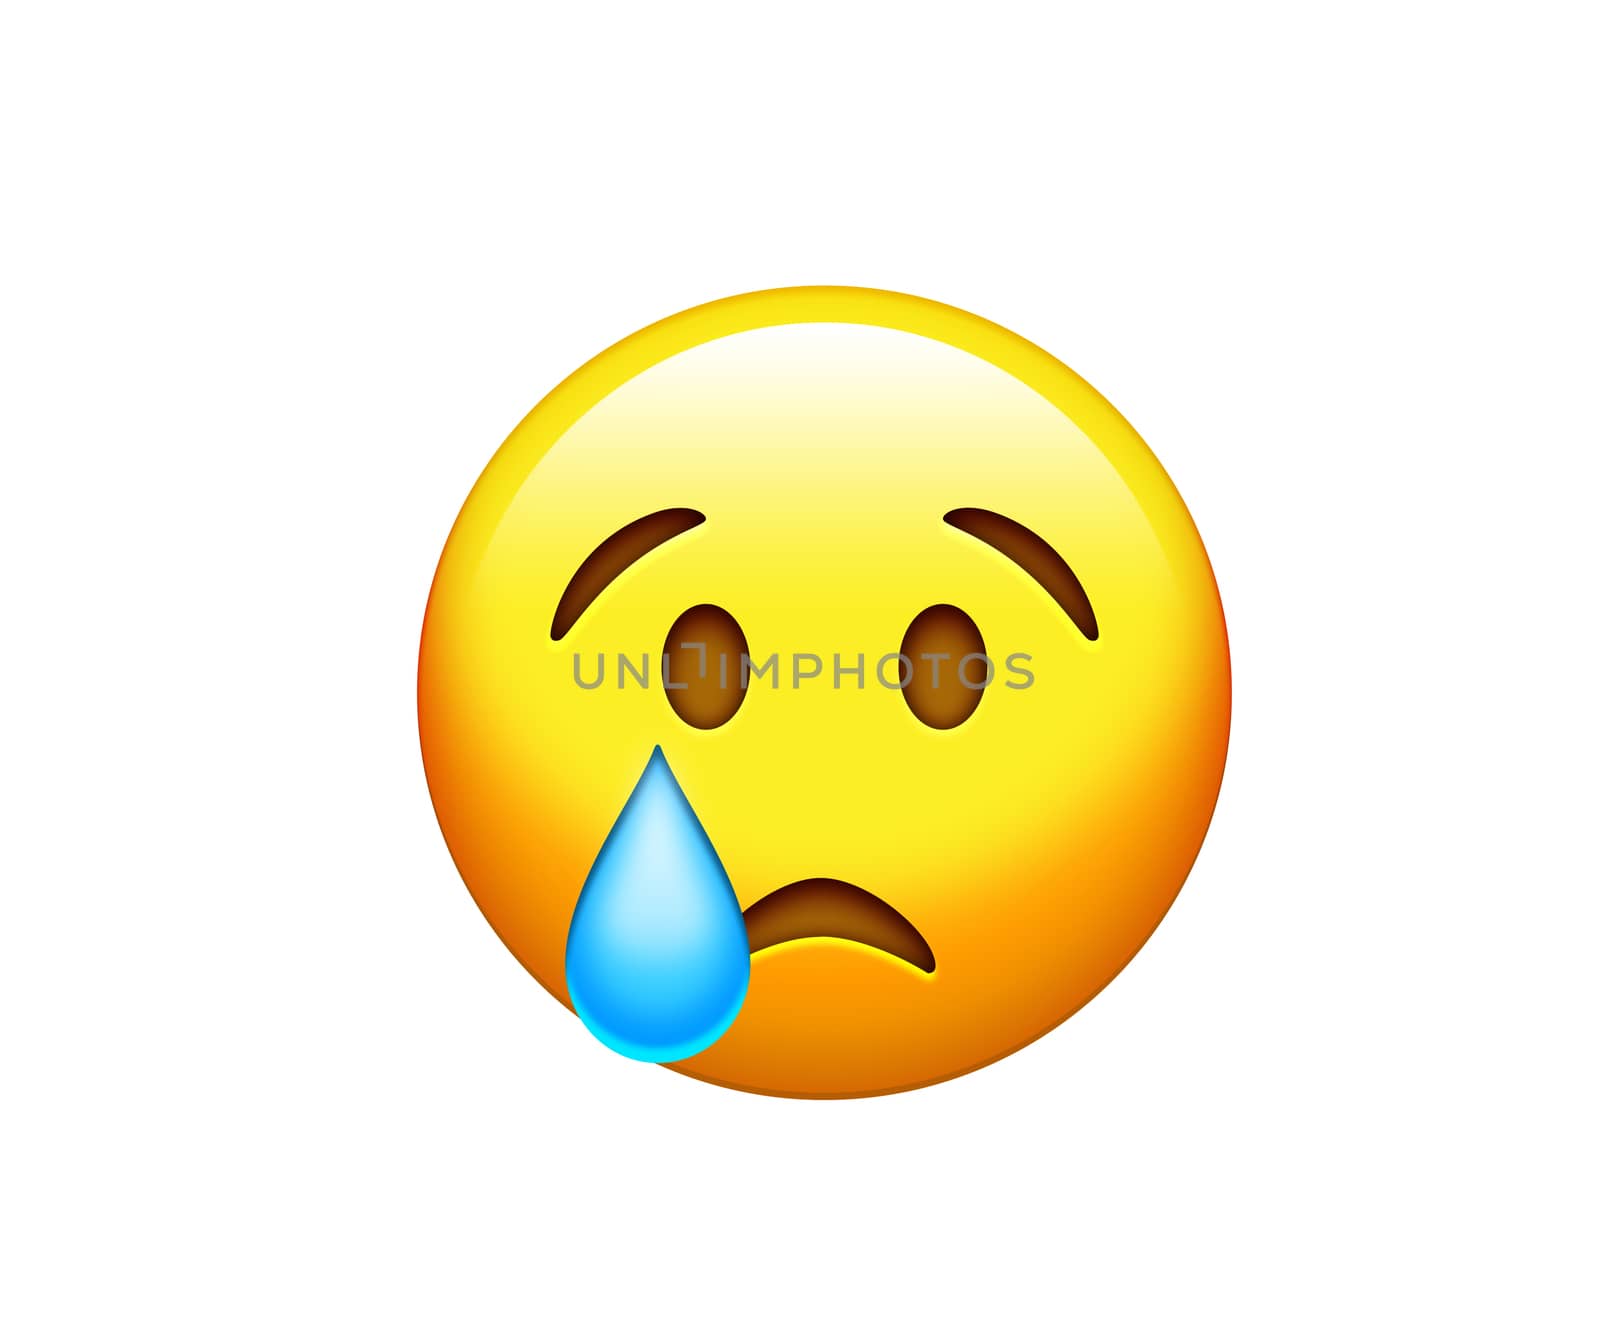 Emoji yellow sad face with drop of blue crying tear icon by cougarsan